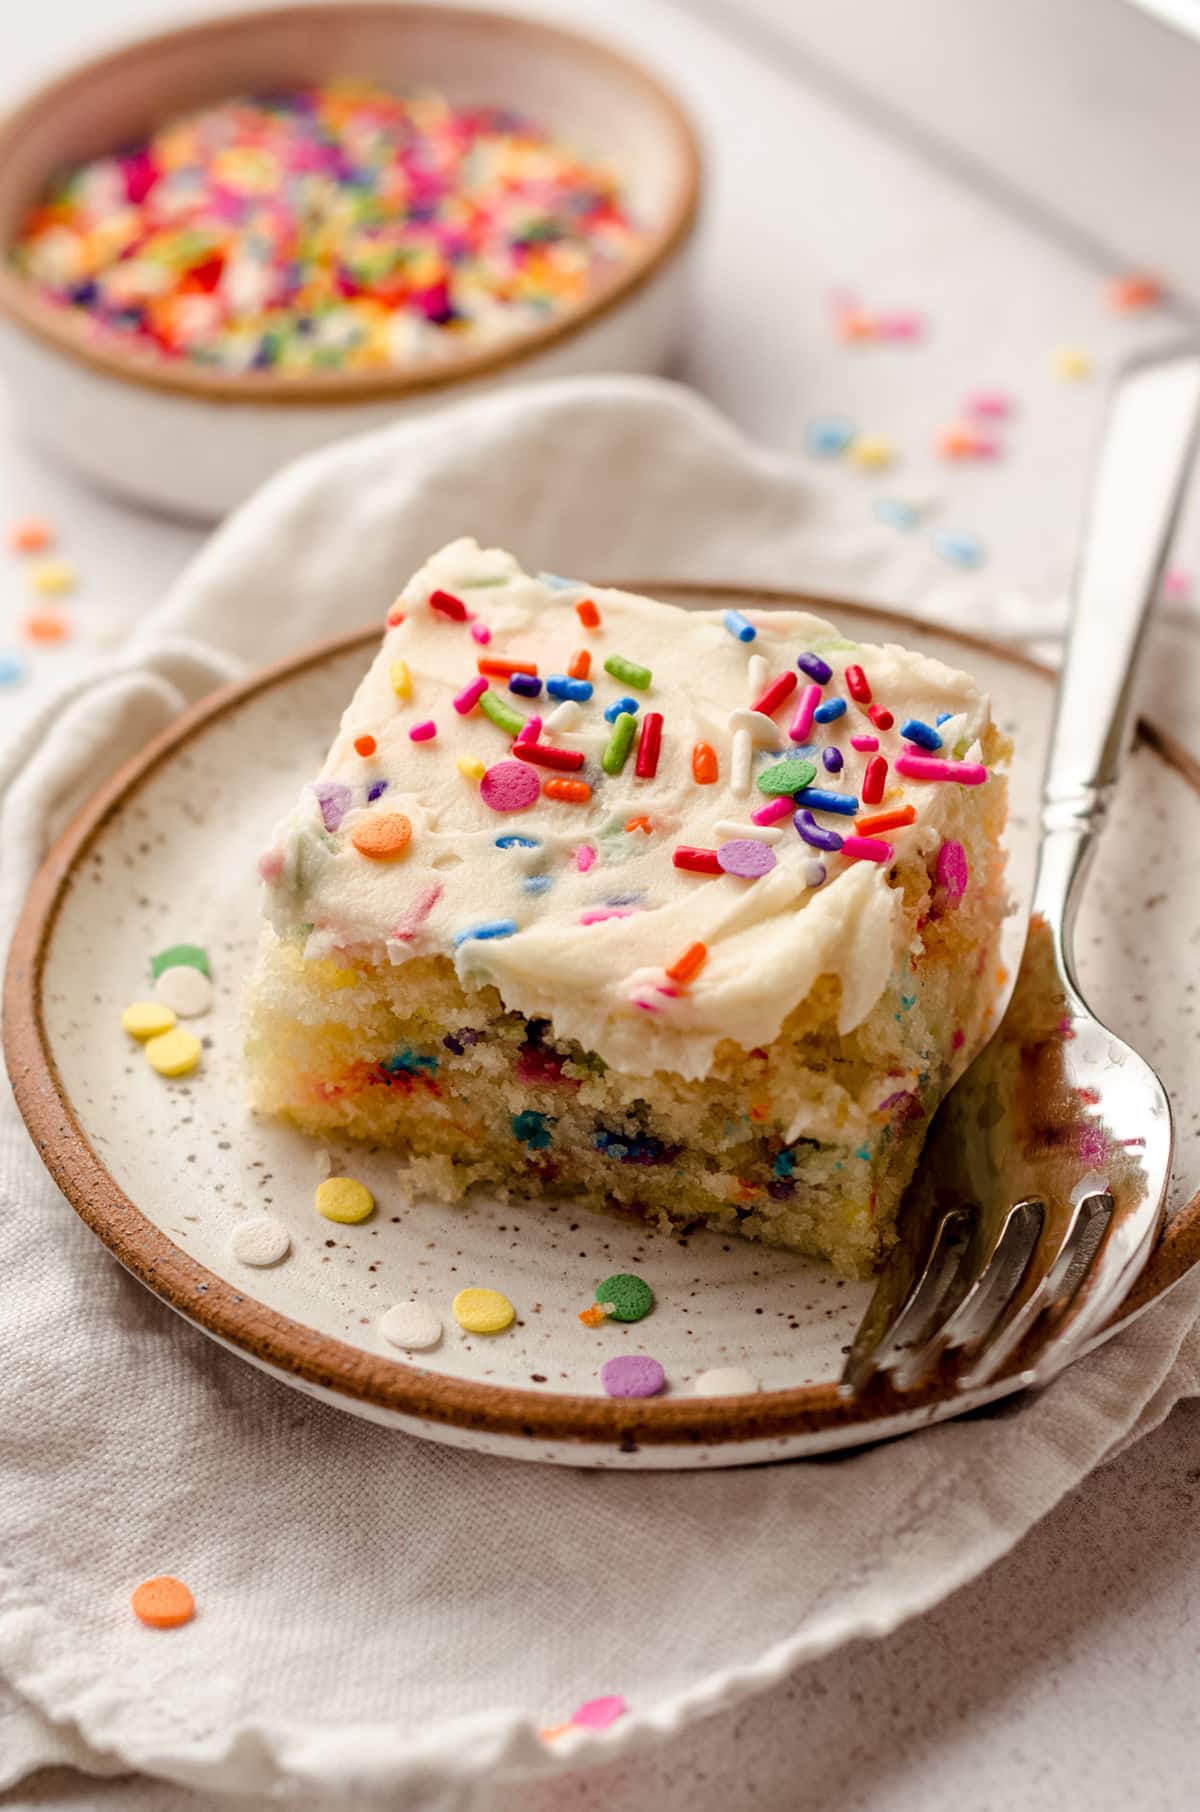 A piece of funfetti cake with vanilla frosting on a plate.